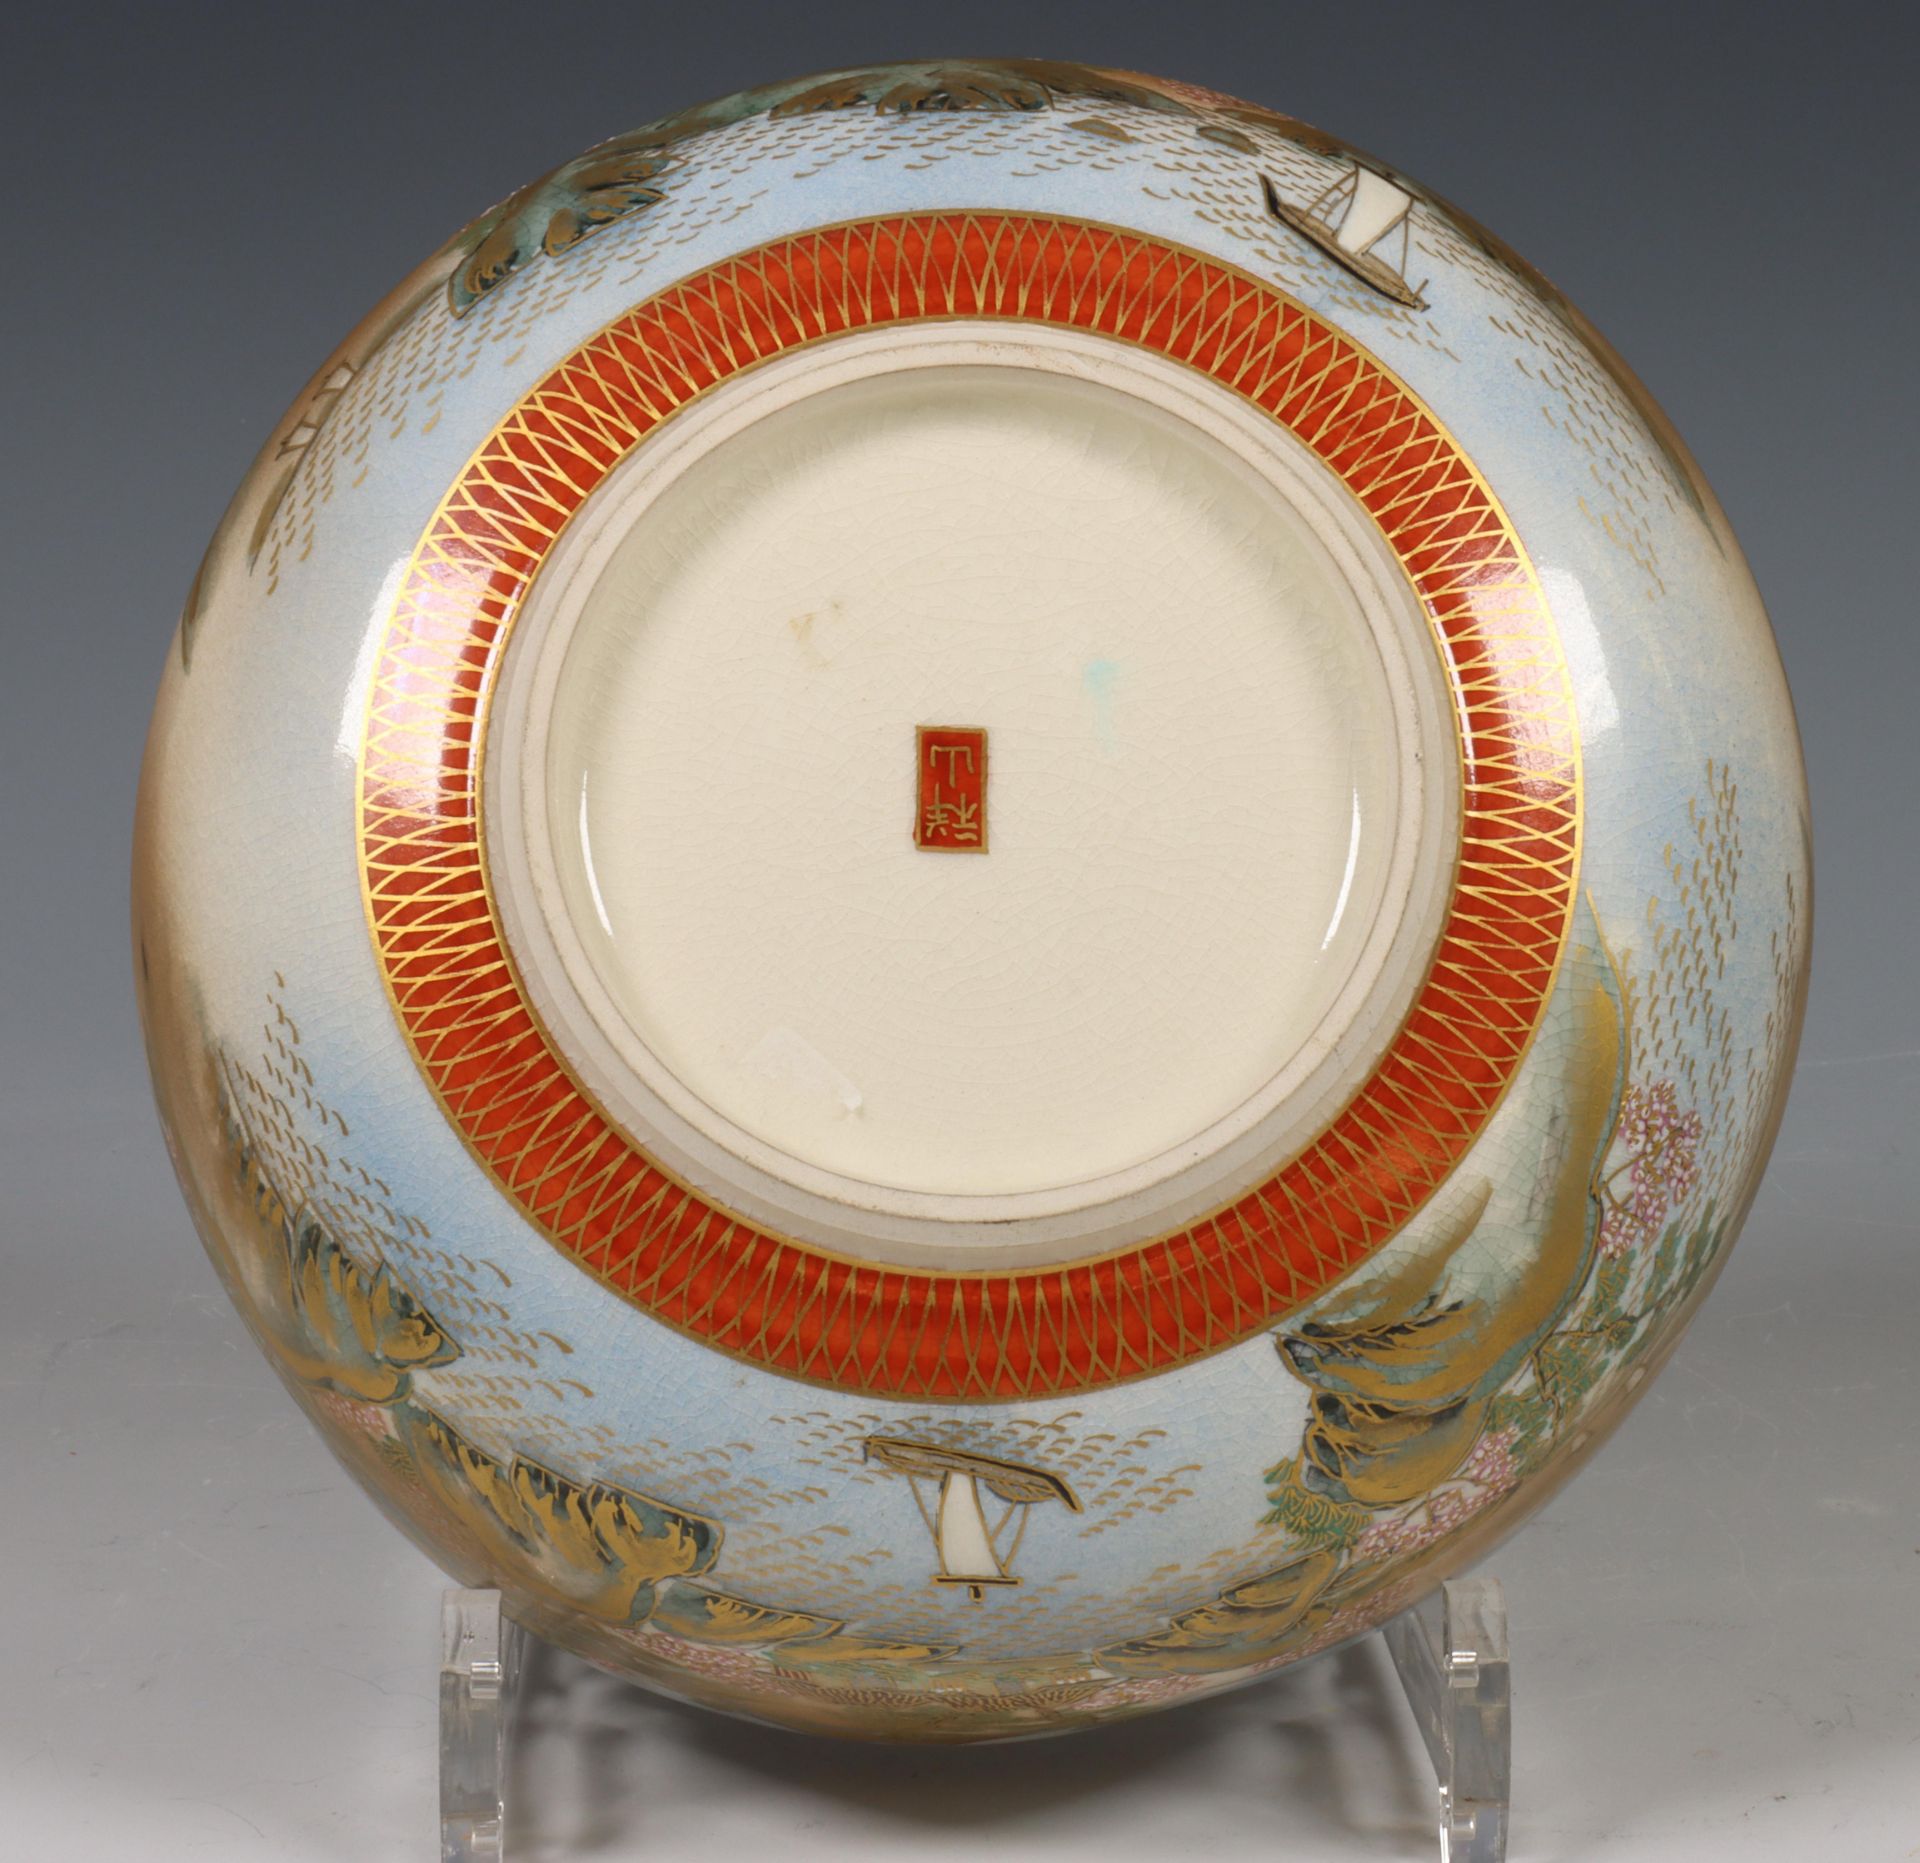 Japan, Satsuma porcelain bowl, 20th century, decorated to the interior with pavilion with mount Fuji - Image 7 of 8